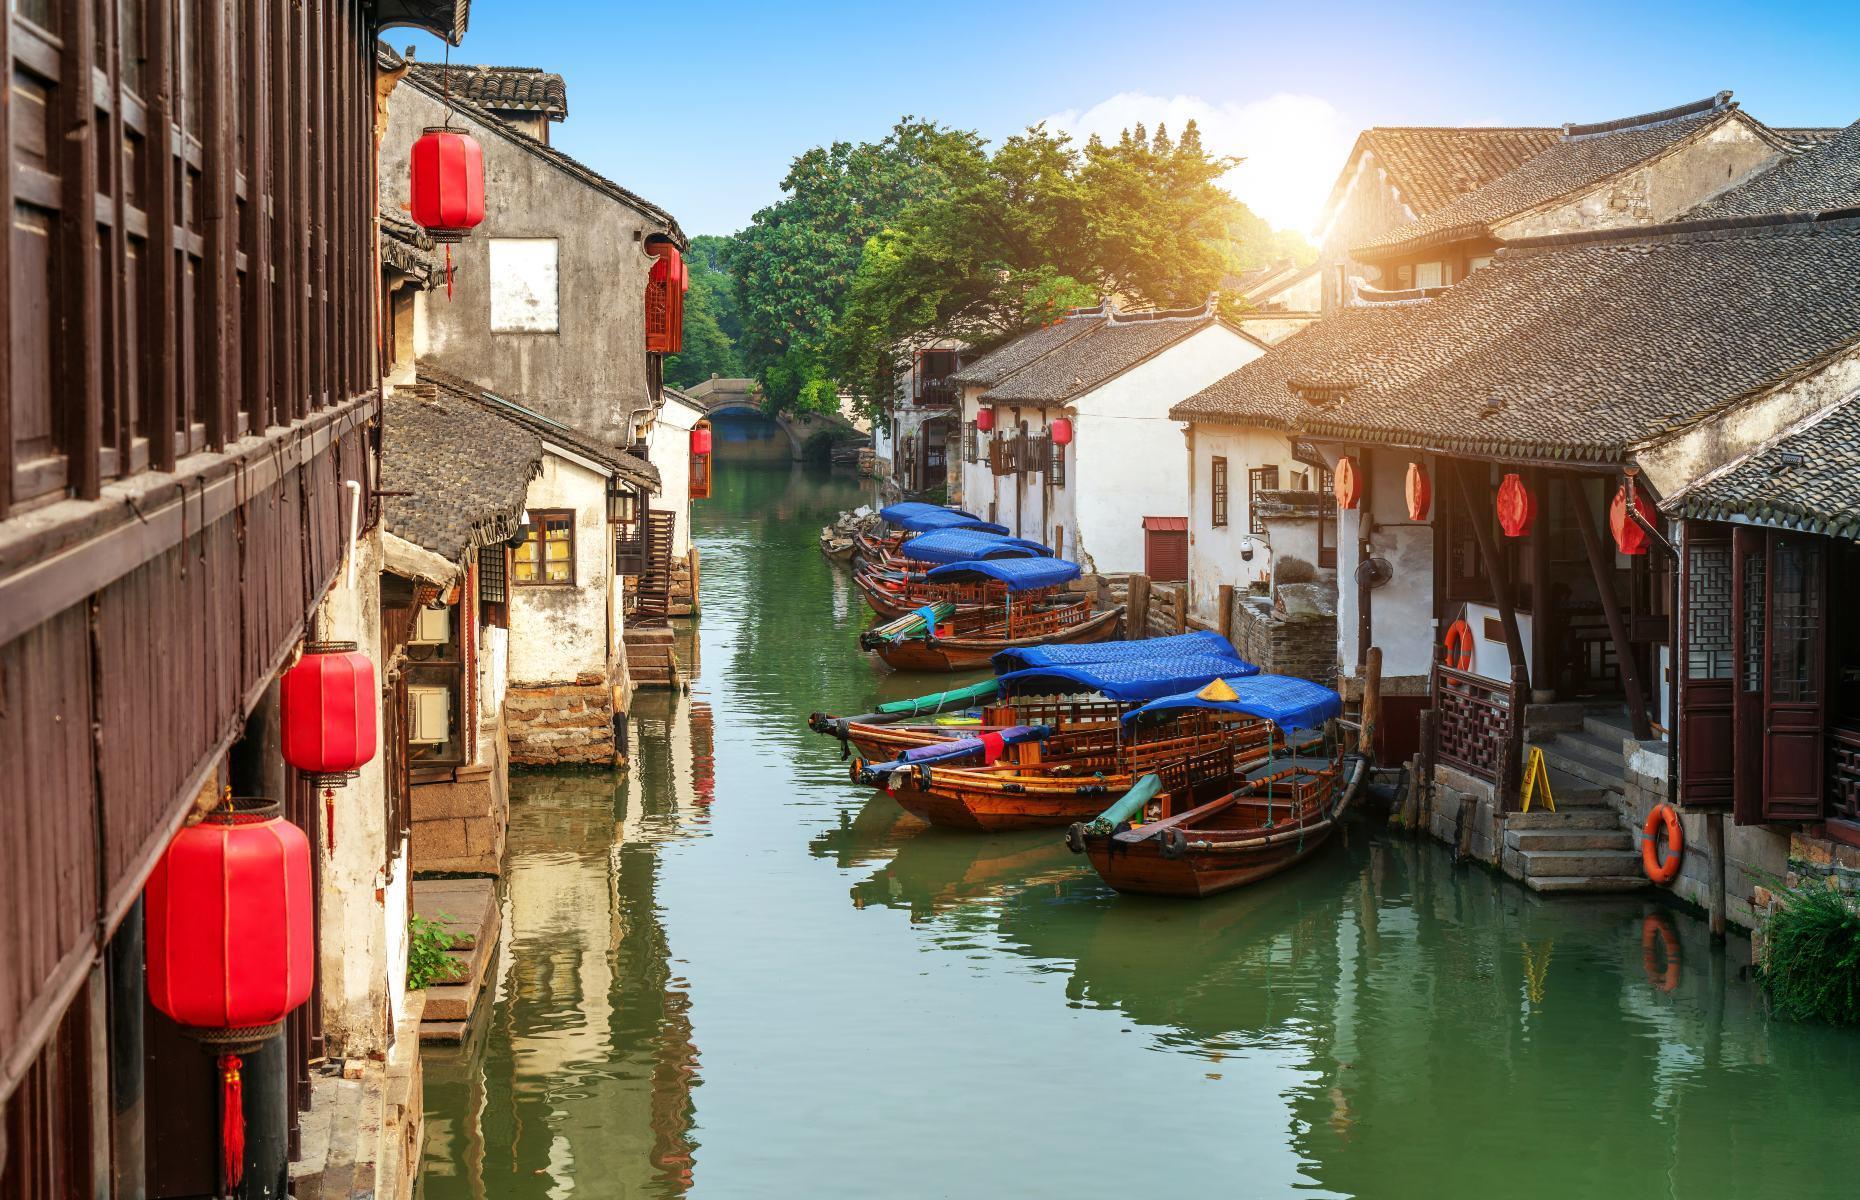 <p>Whether it’s a vast shipping canal or a narrow waterway, canals have been a prime transportation route for trade and leisure for centuries. Spanning everything from floating lagoon cities to cross-country water channels, here we take a look at the most incredible canals and waterways from across the globe.</p>